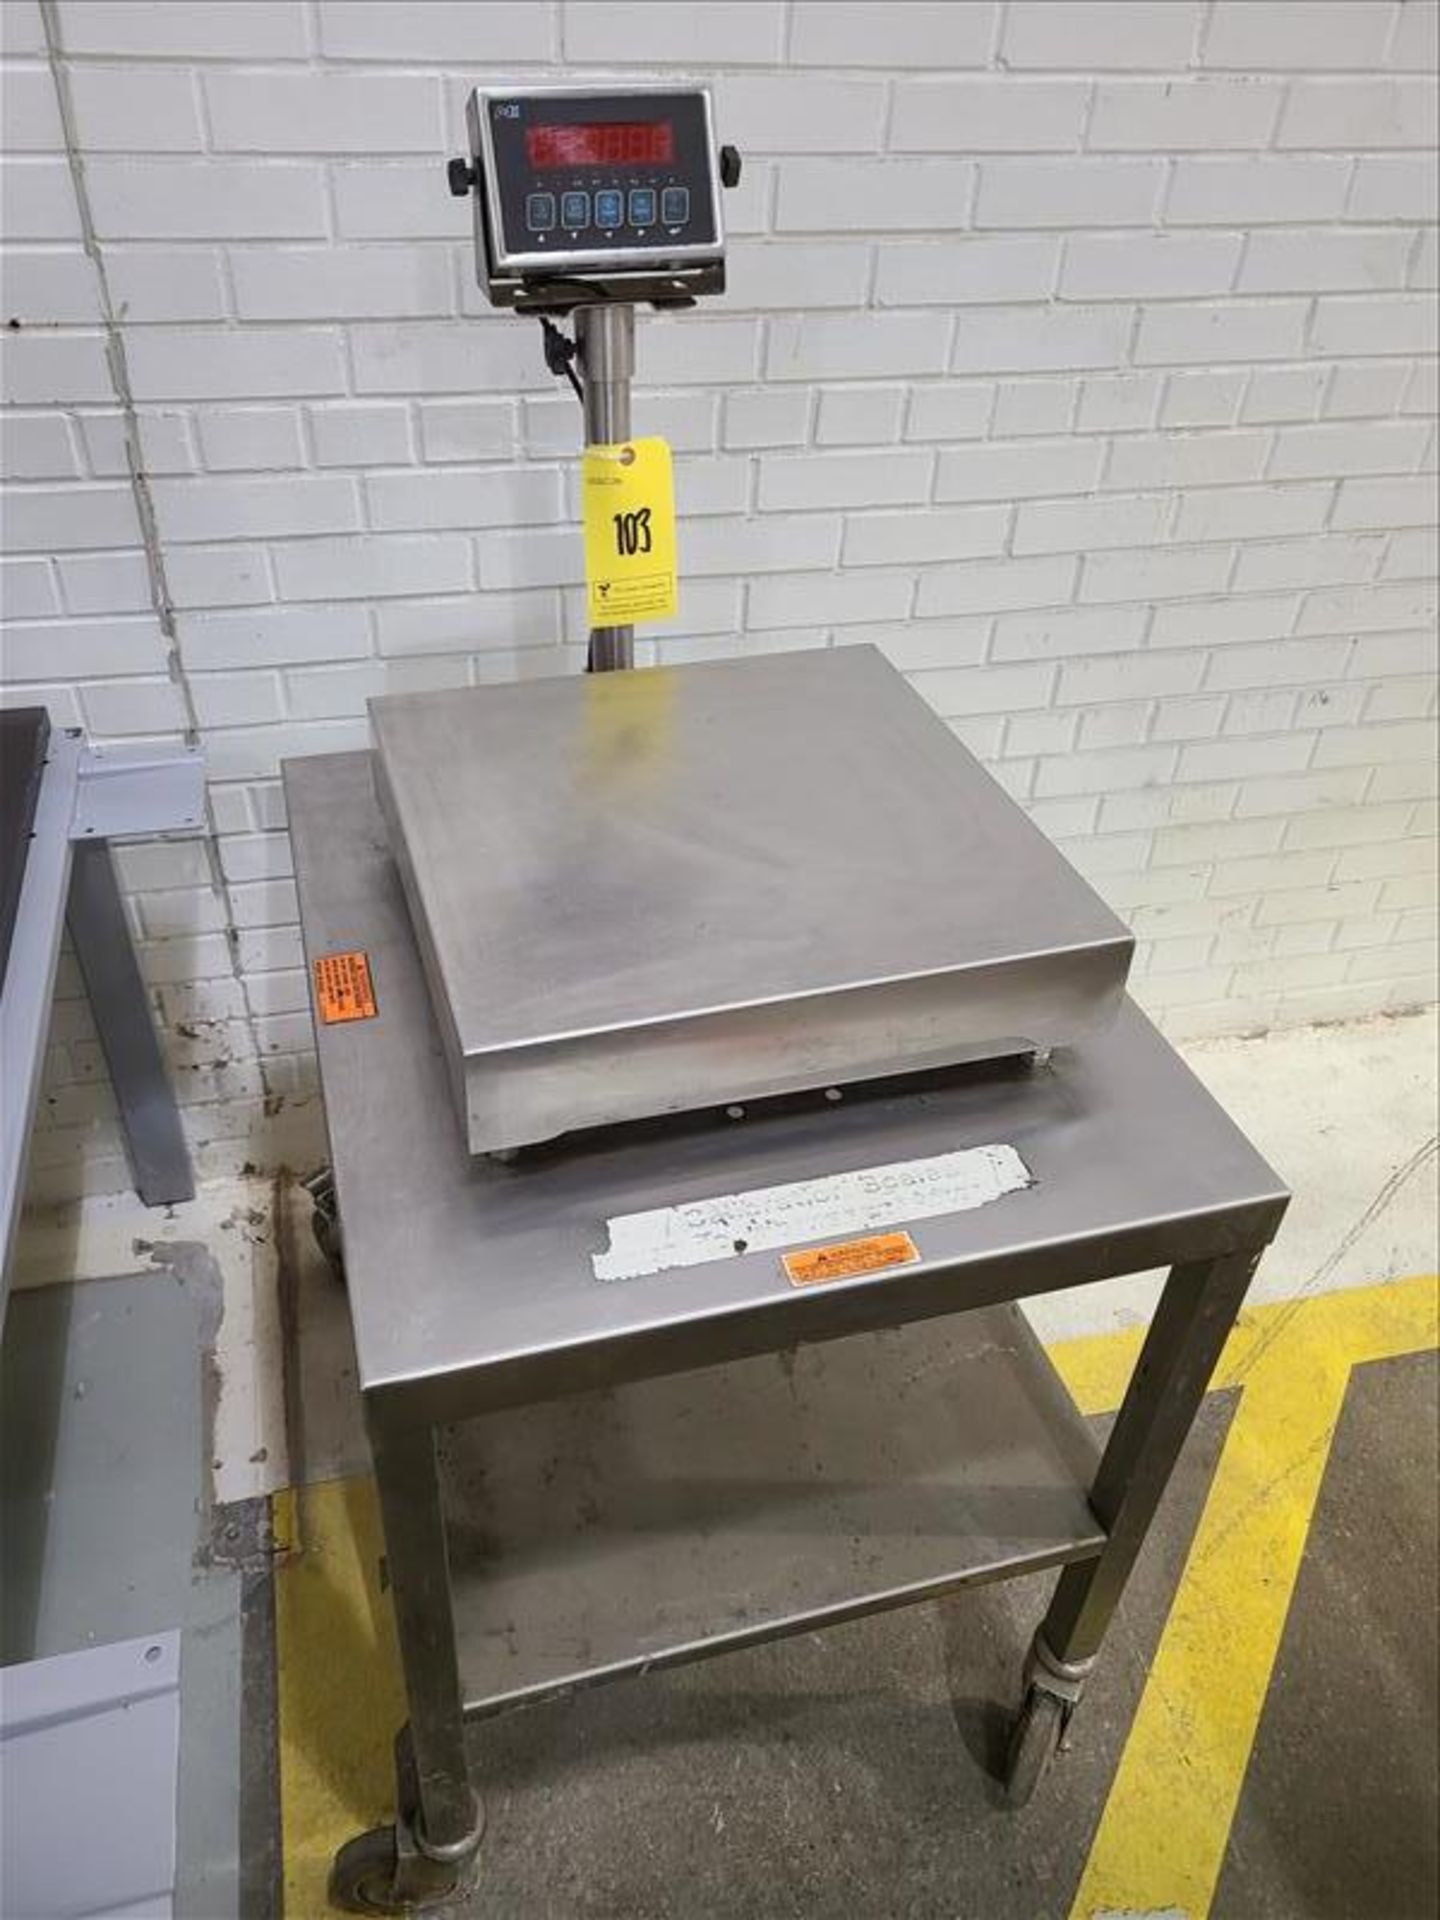 Western stainless digital platform scale, mod M-1, s/n 4042, 18" x 18", with stainless mobile stand,